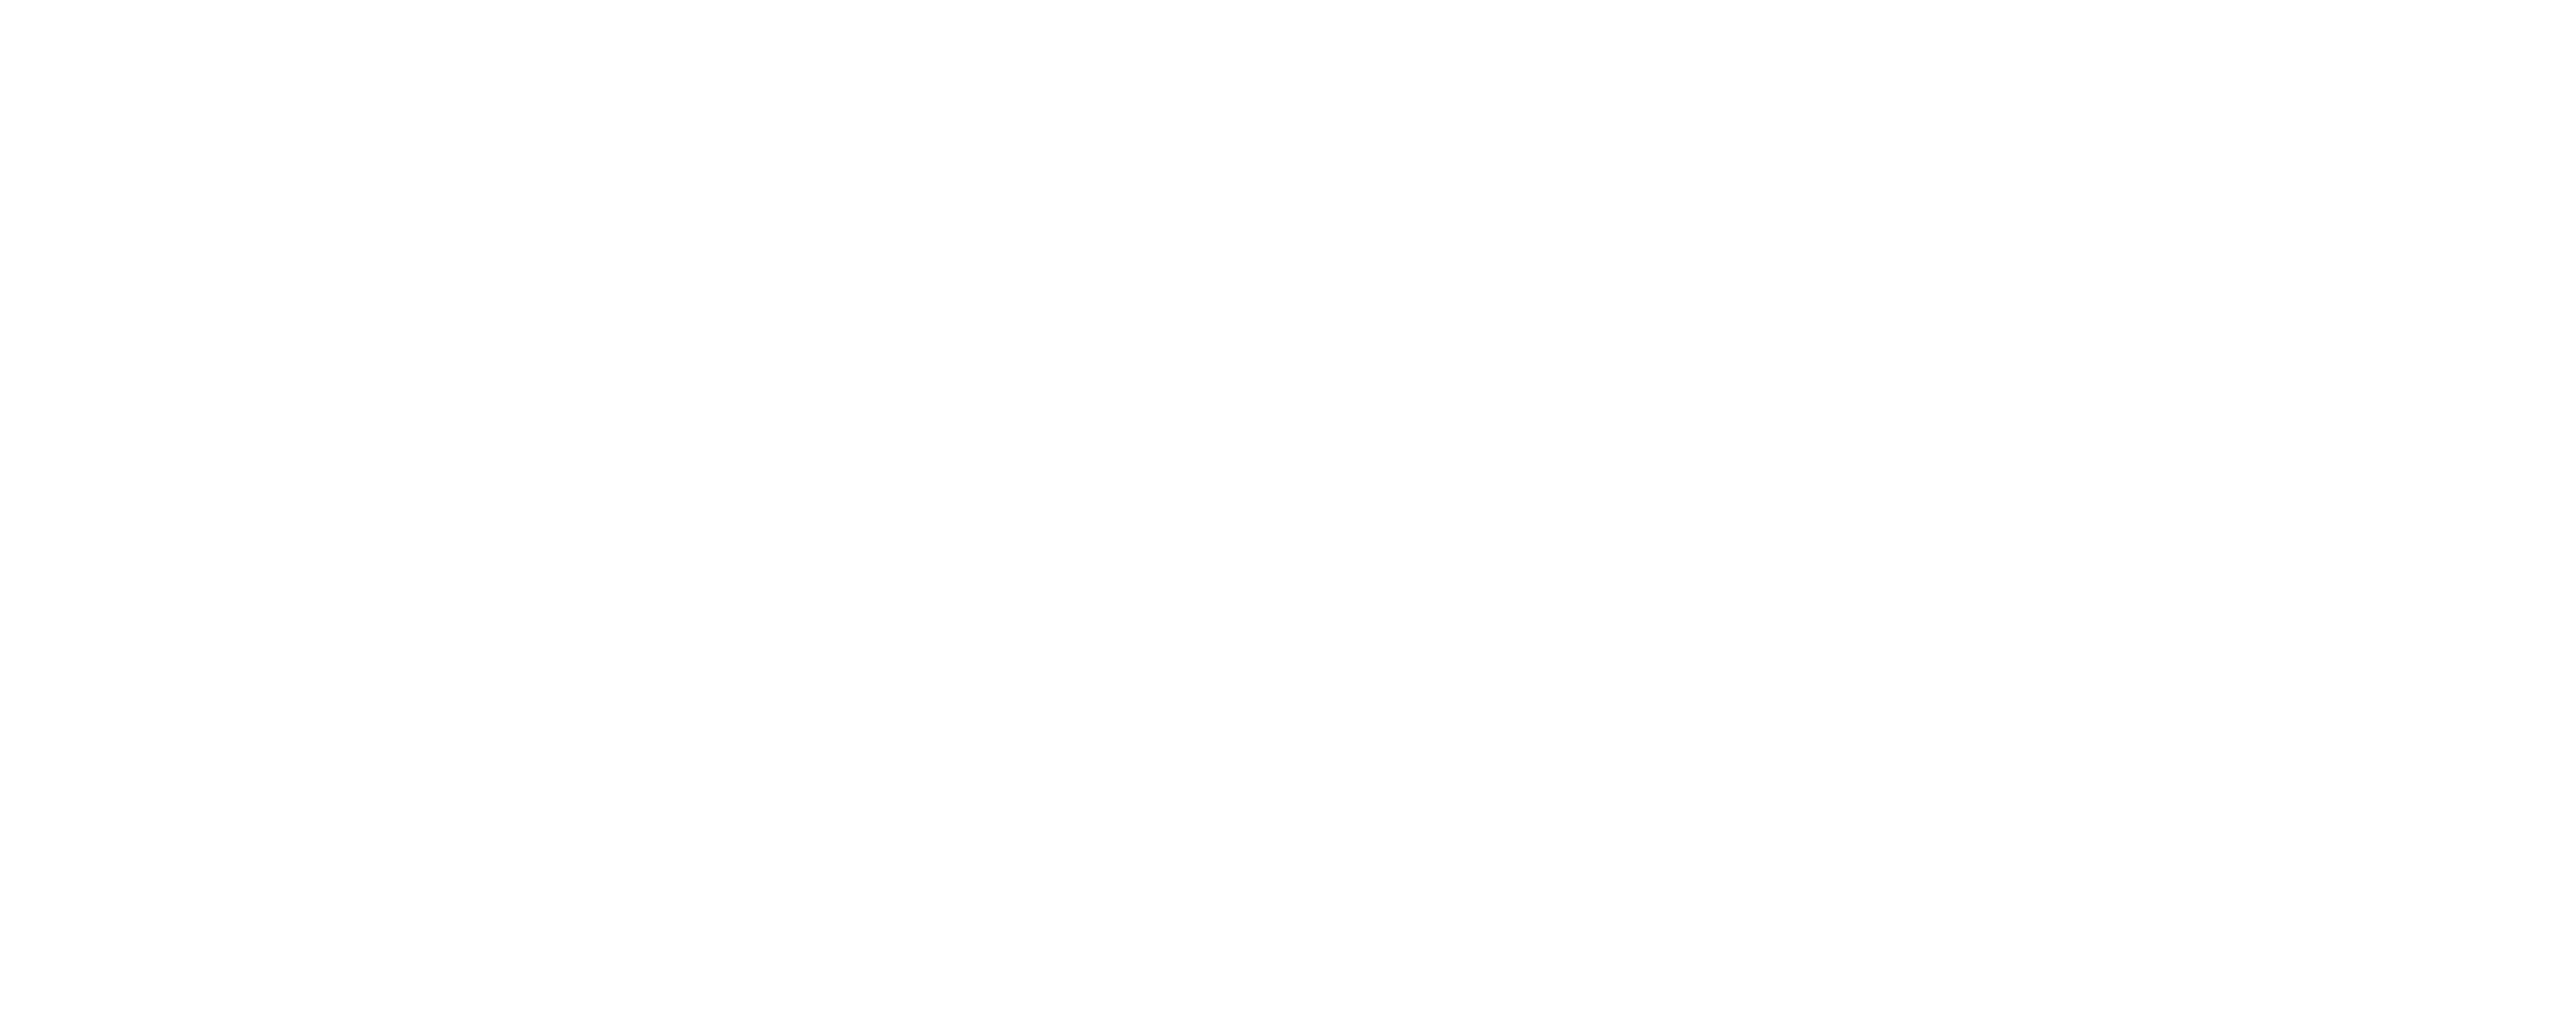 Independence Place Logo